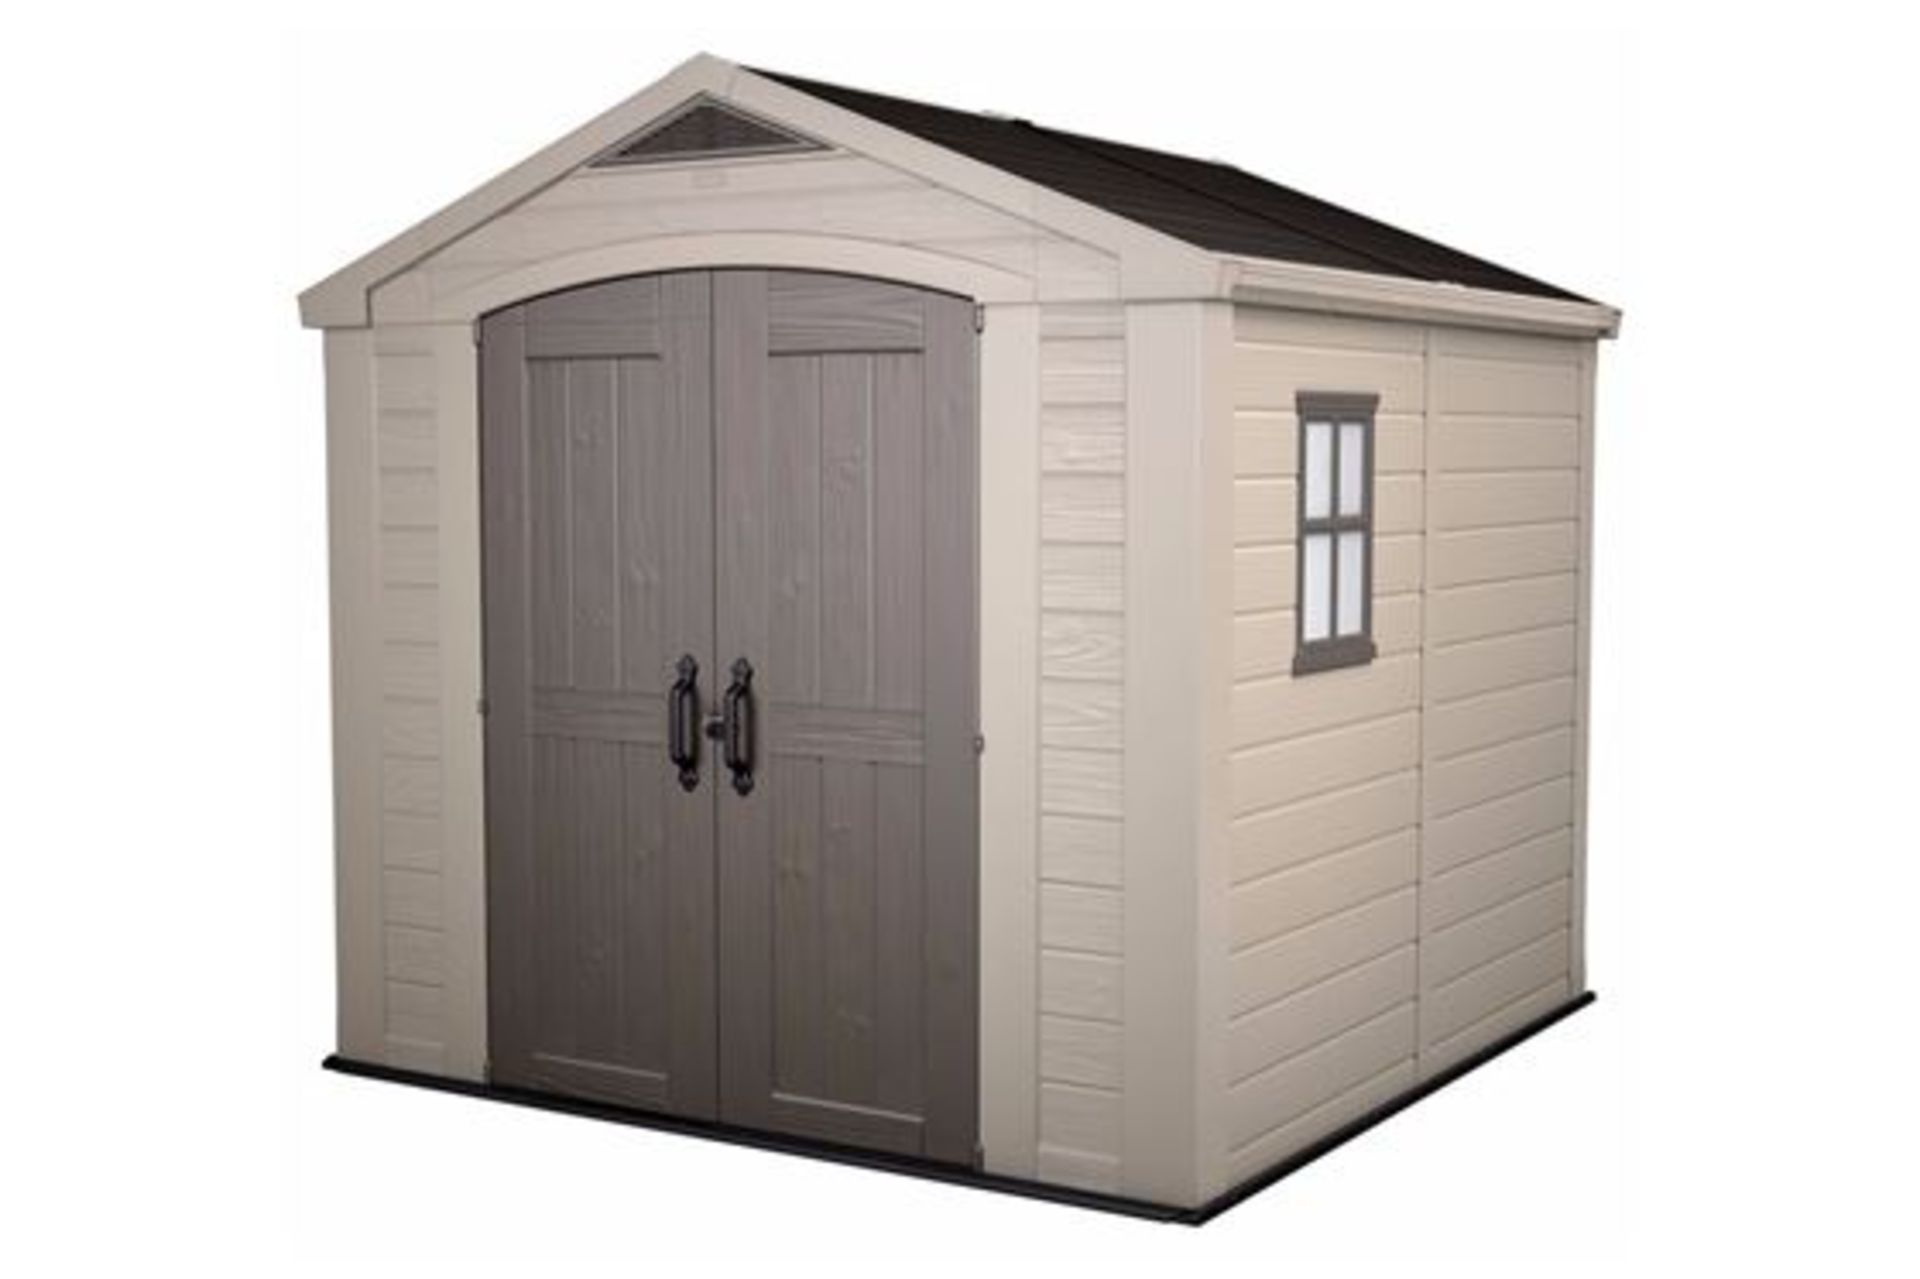 Keter Factor 8 x 8 Shed RRP £699 - Image 2 of 3